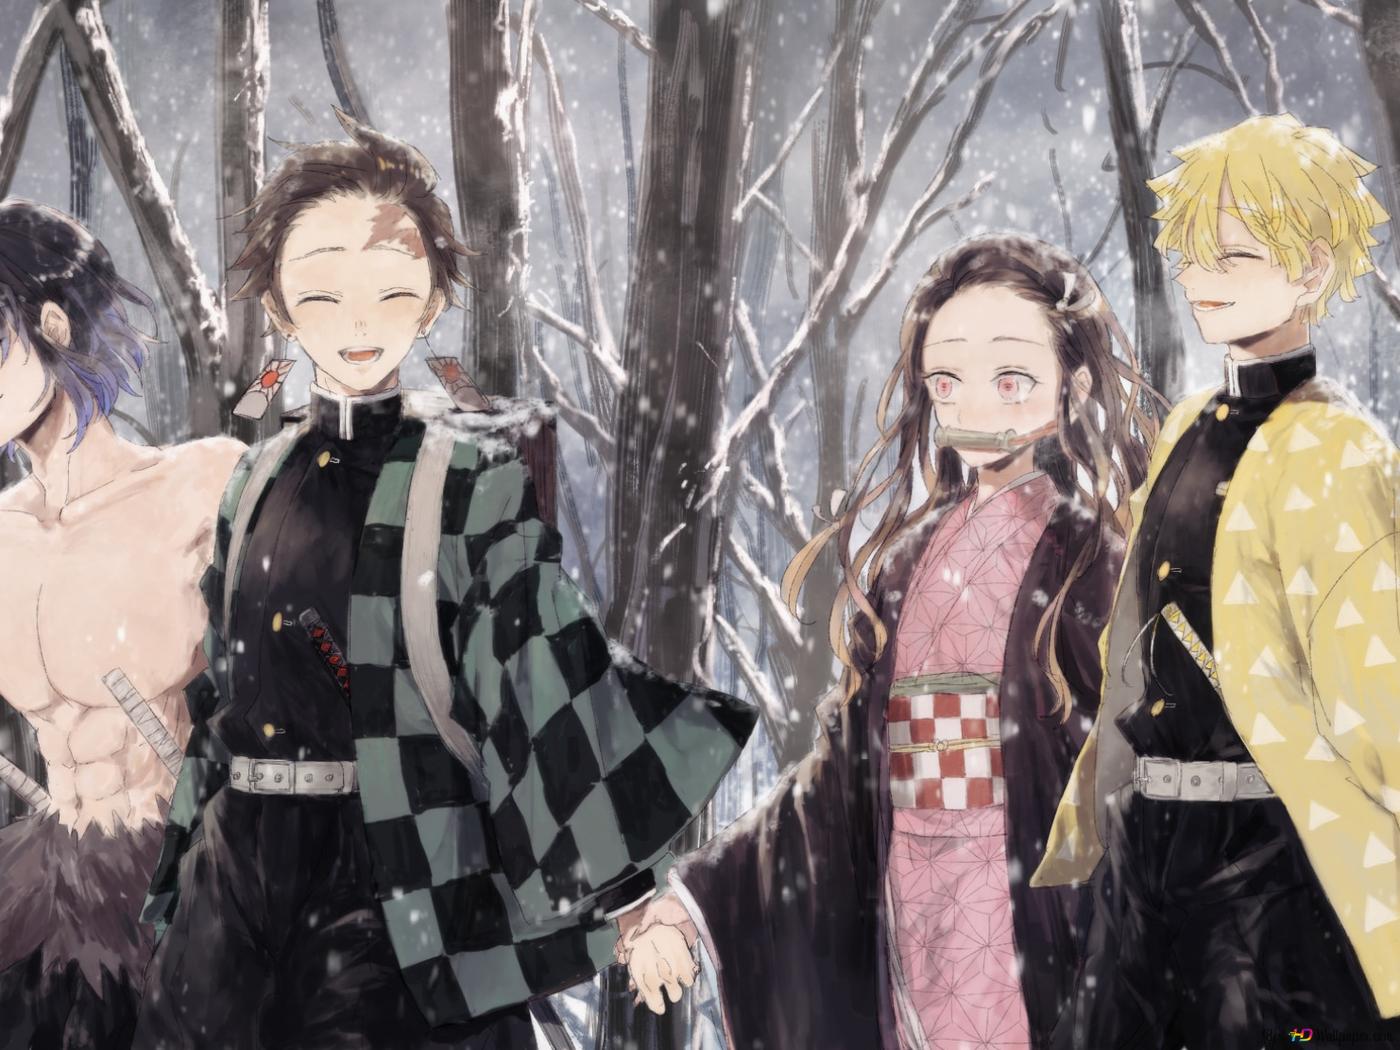 A group of characters from the anime Demon Slayer: Kimetsu no Yaiba standing in a snowy forest. - Nezuko